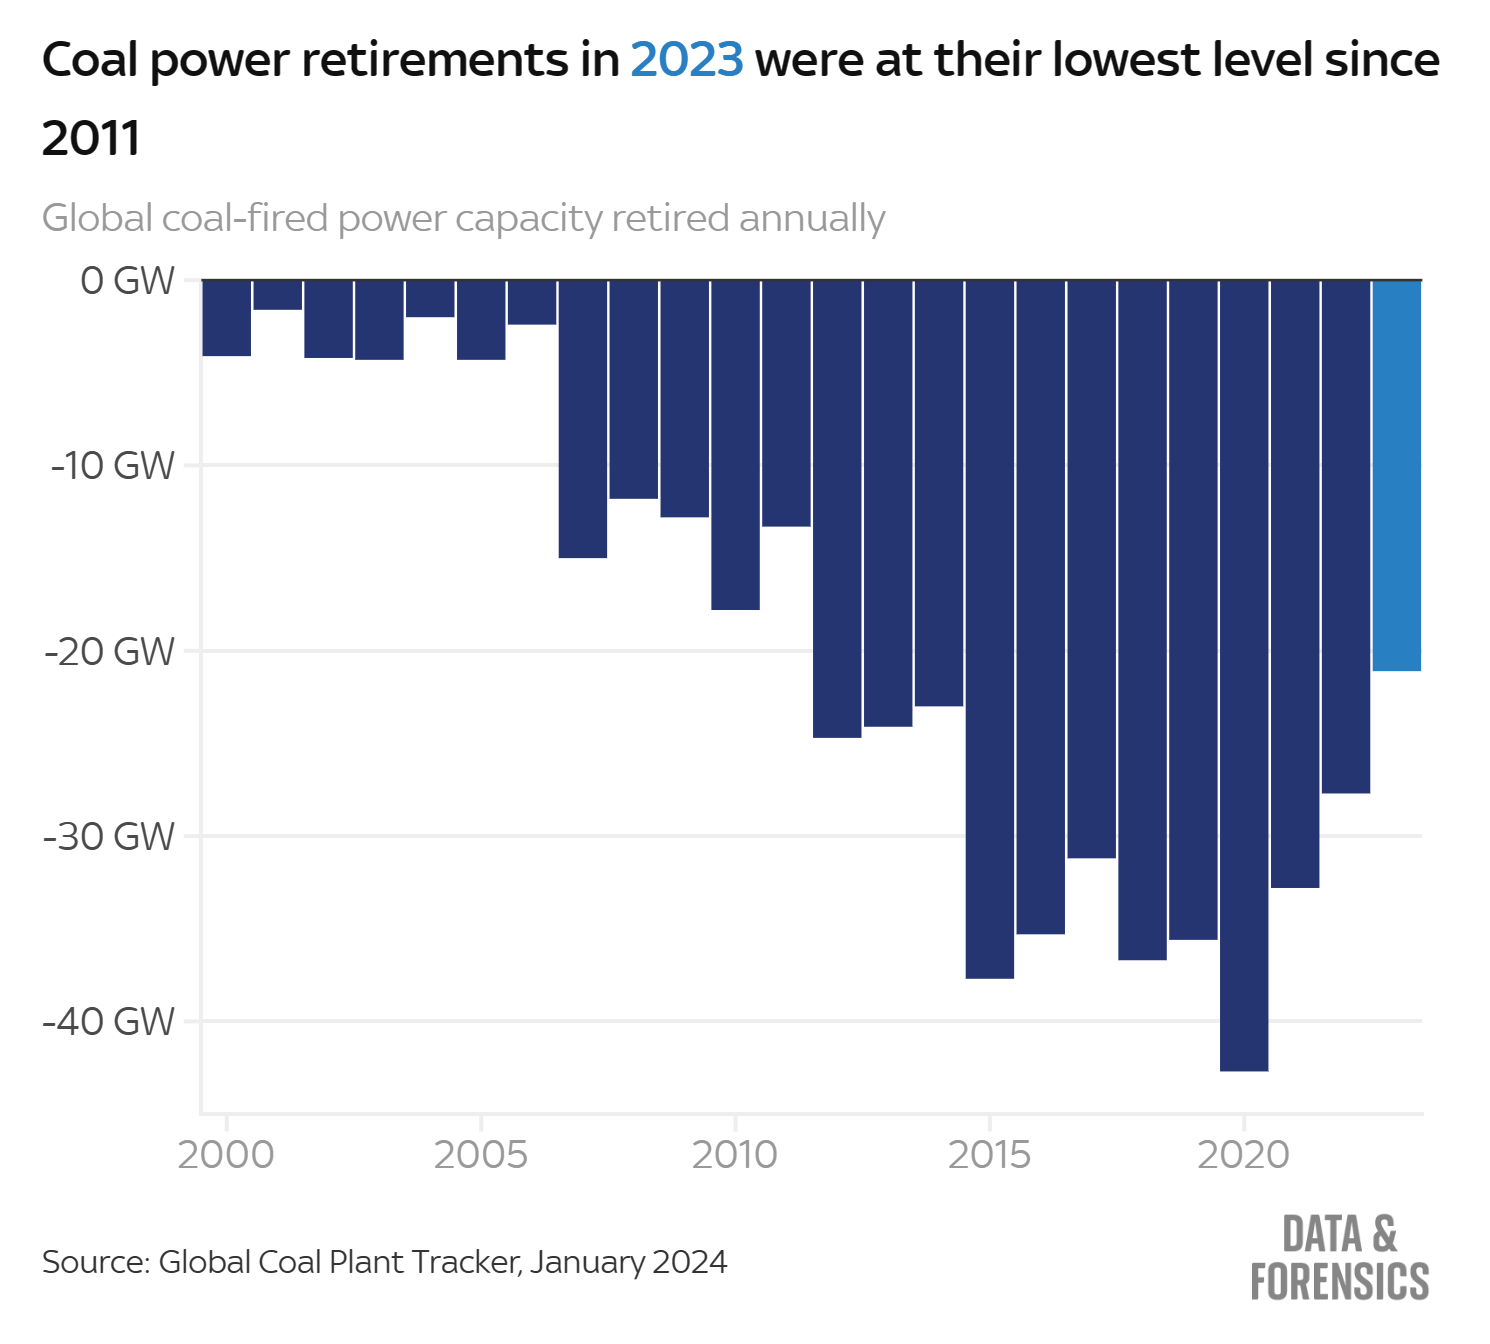 Global coal-fired power capacity (GW) retired annually, 2000-2023. Coal power retirements in 2023 were at their lowest level since 2011. Data: GEM Global Coal Plant Tracker, January 2024. Graphic: Daniel Dunford / Sky News